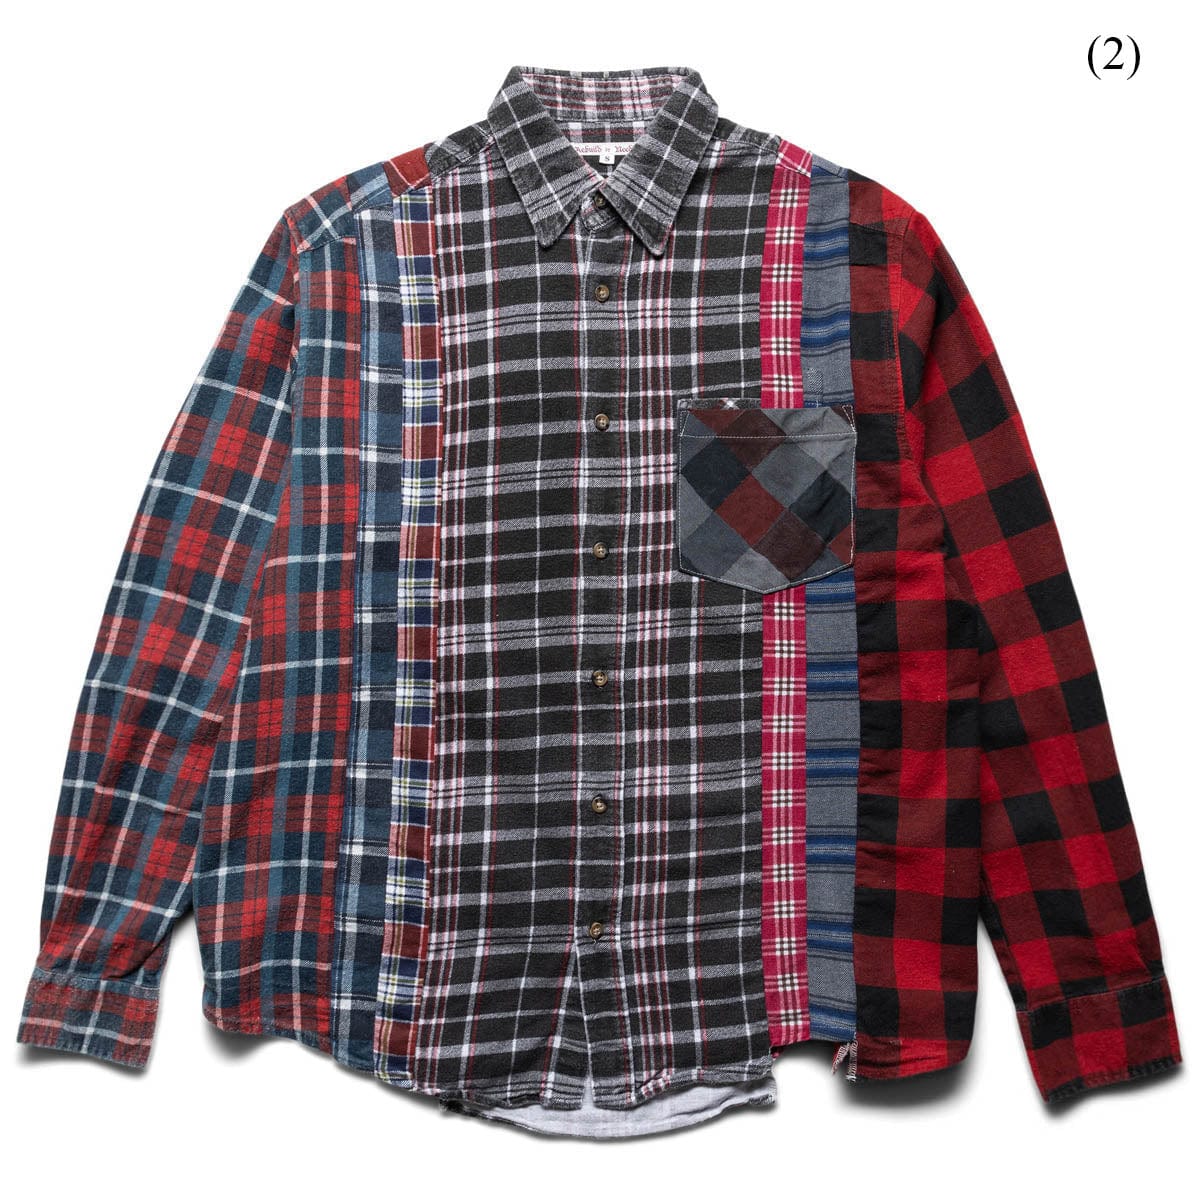 Needles FLANNEL SHIRT - 7 CUTS SHIRT SS22 (SMALL/MULTIPLE STYLES)